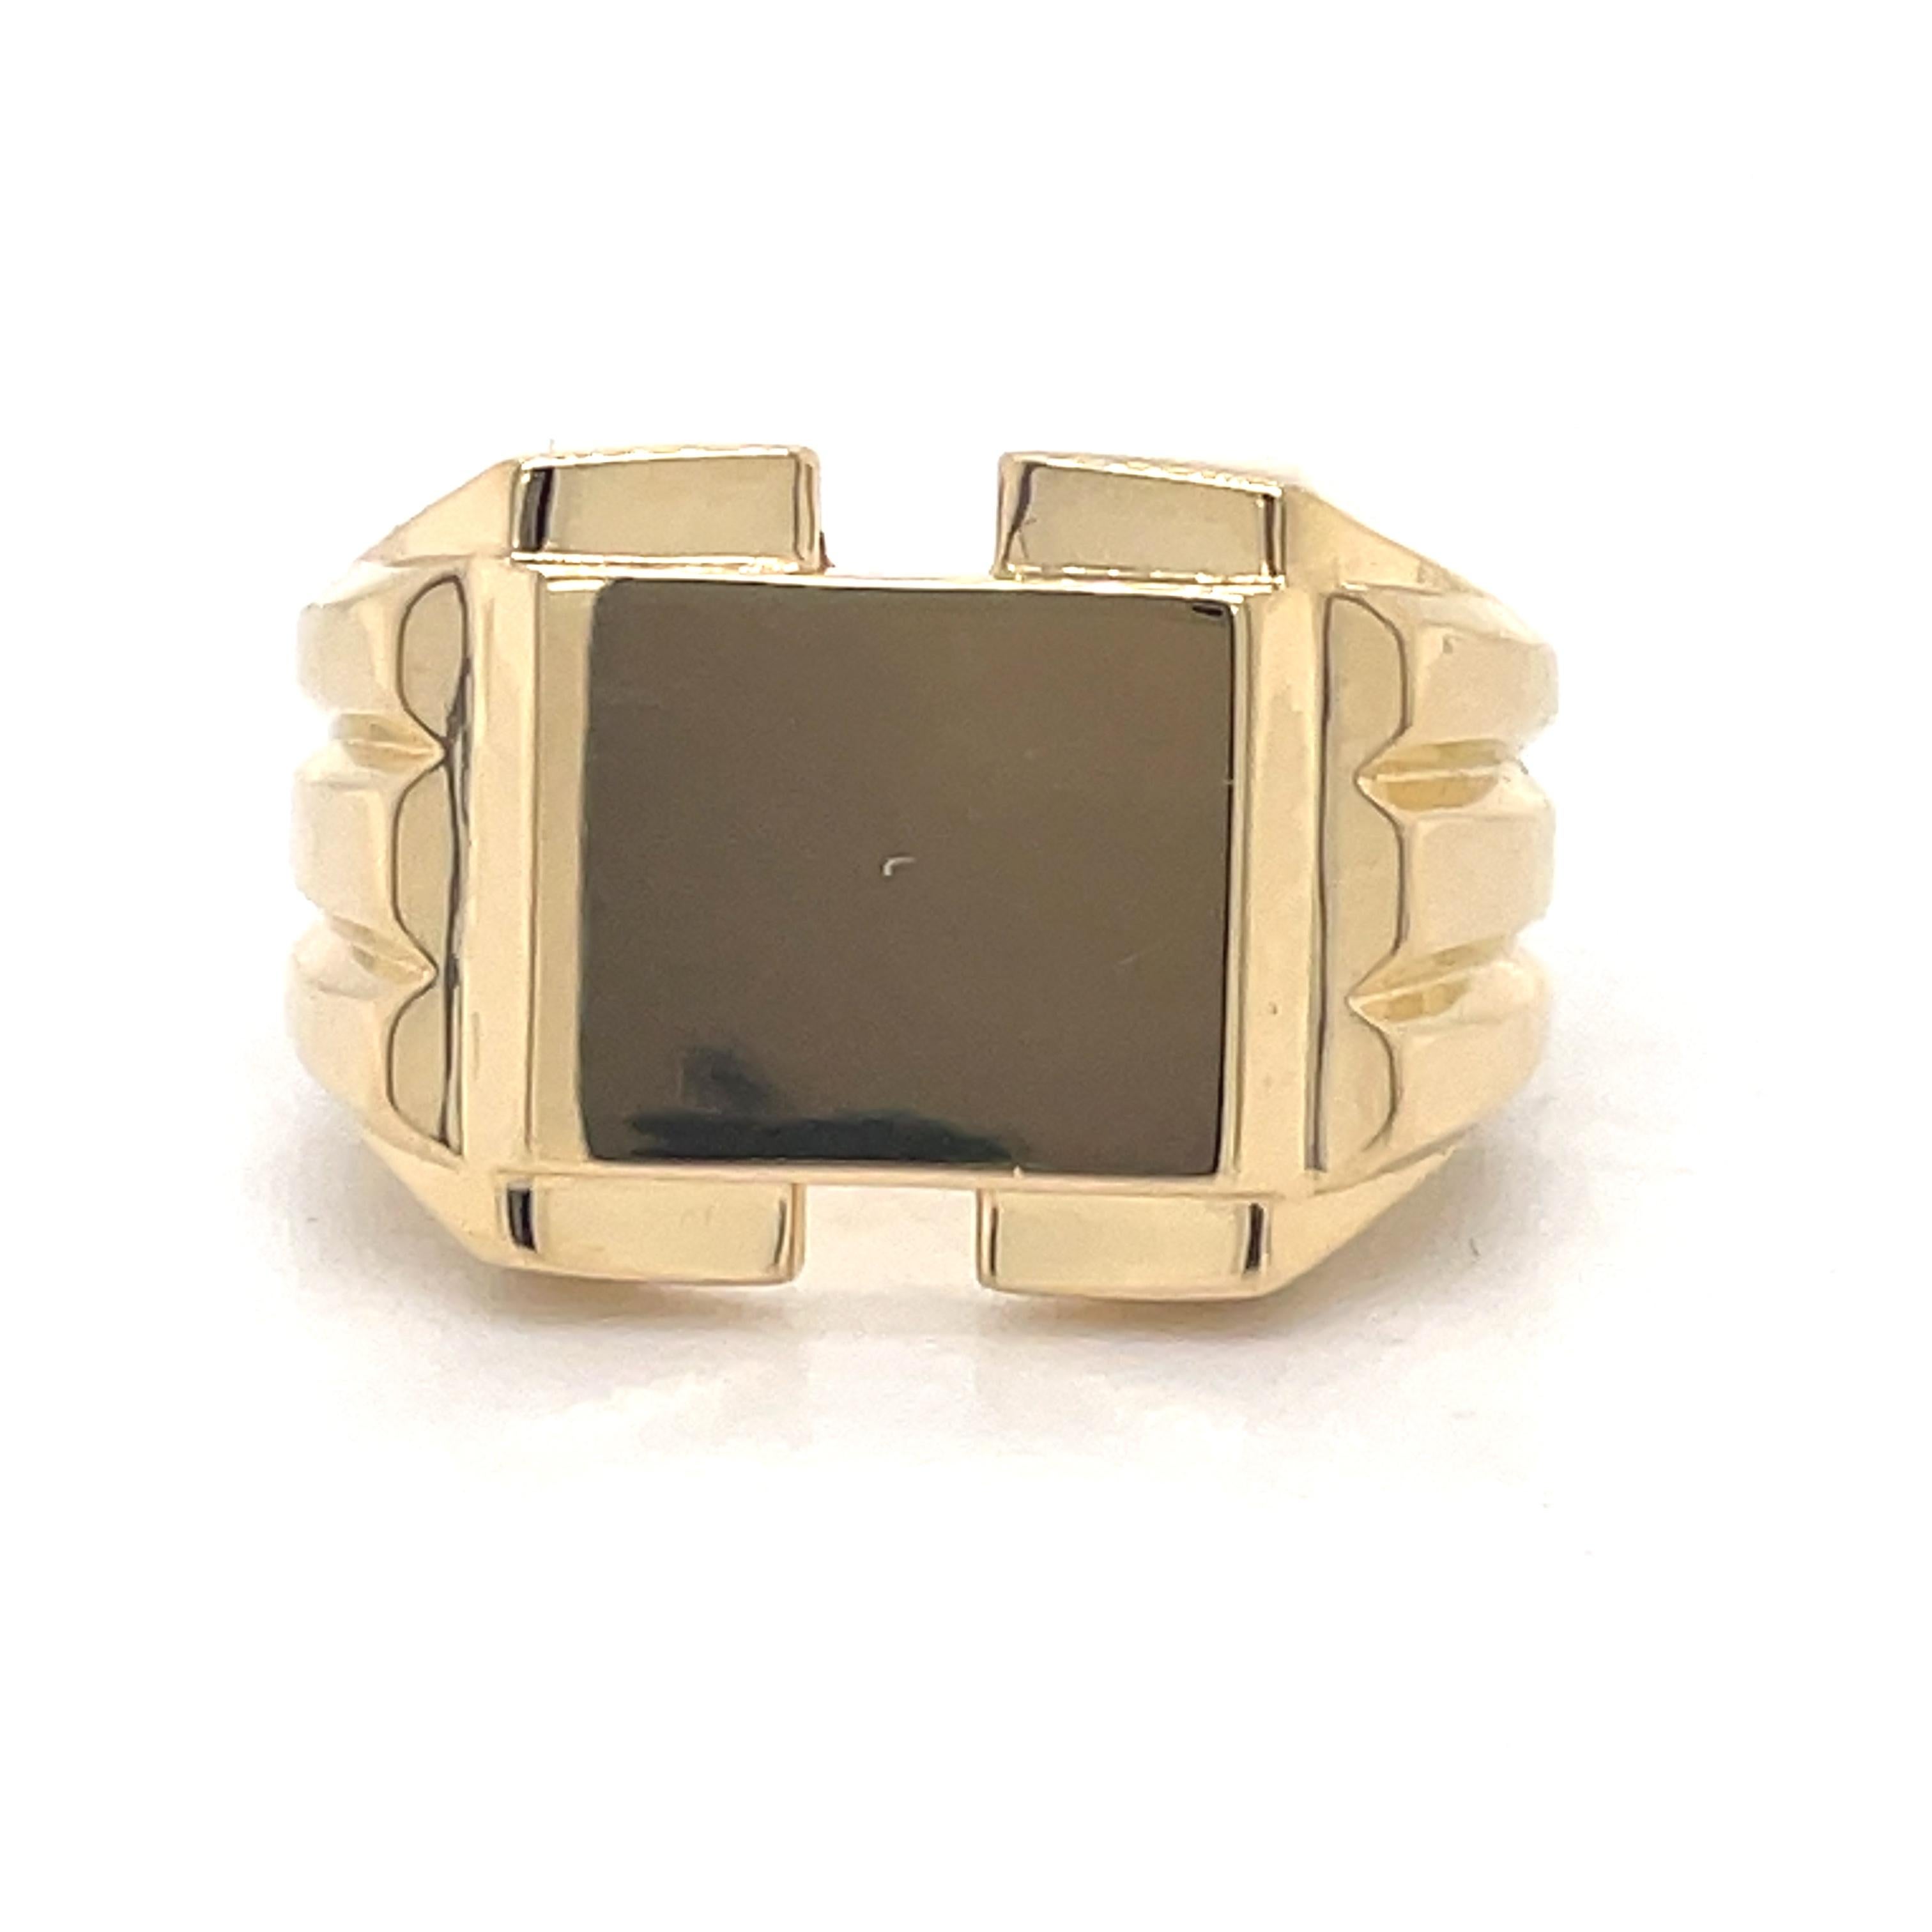 Unisex Gold Signet Ring, Vintage Style Ring, 18k Yellow Gold, made to order ring In New Condition For Sale In Ramat Gan, IL